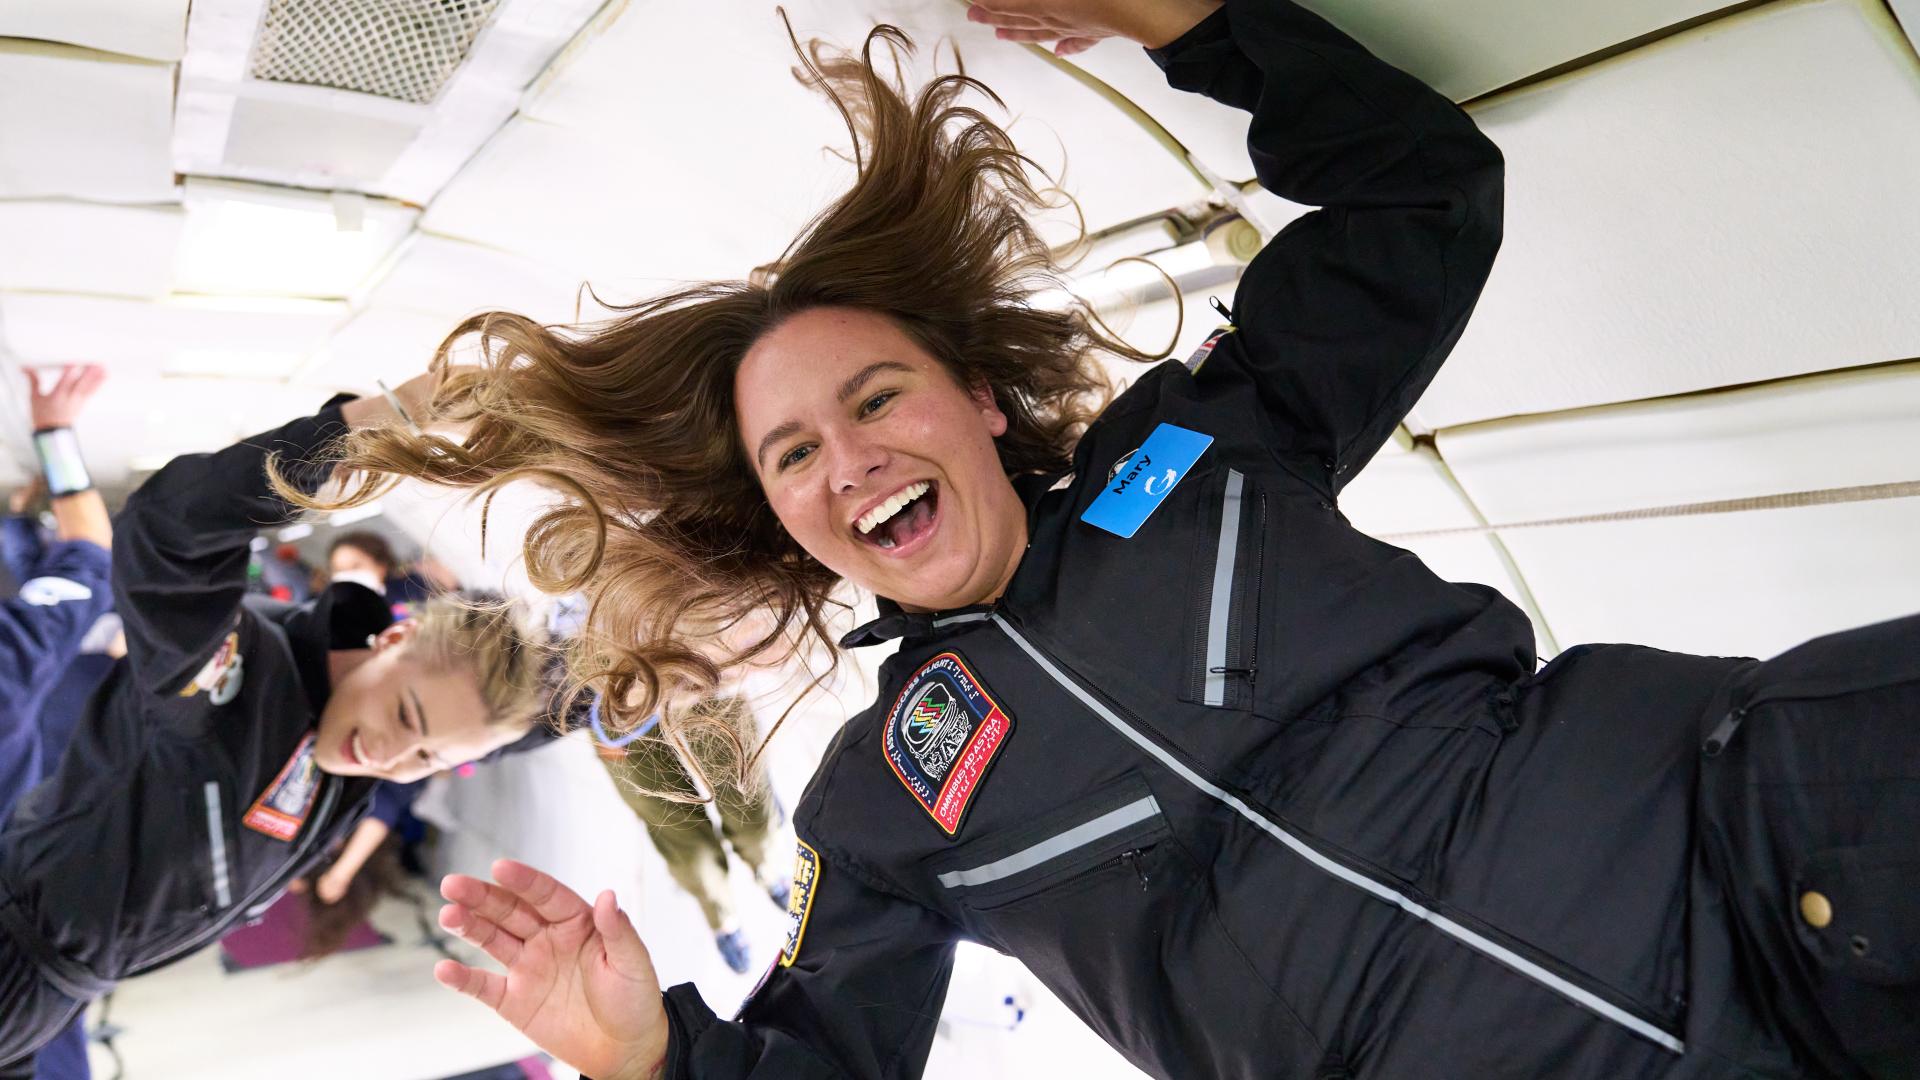 Two women laugh while floating in space (Photo: AstroAccess)